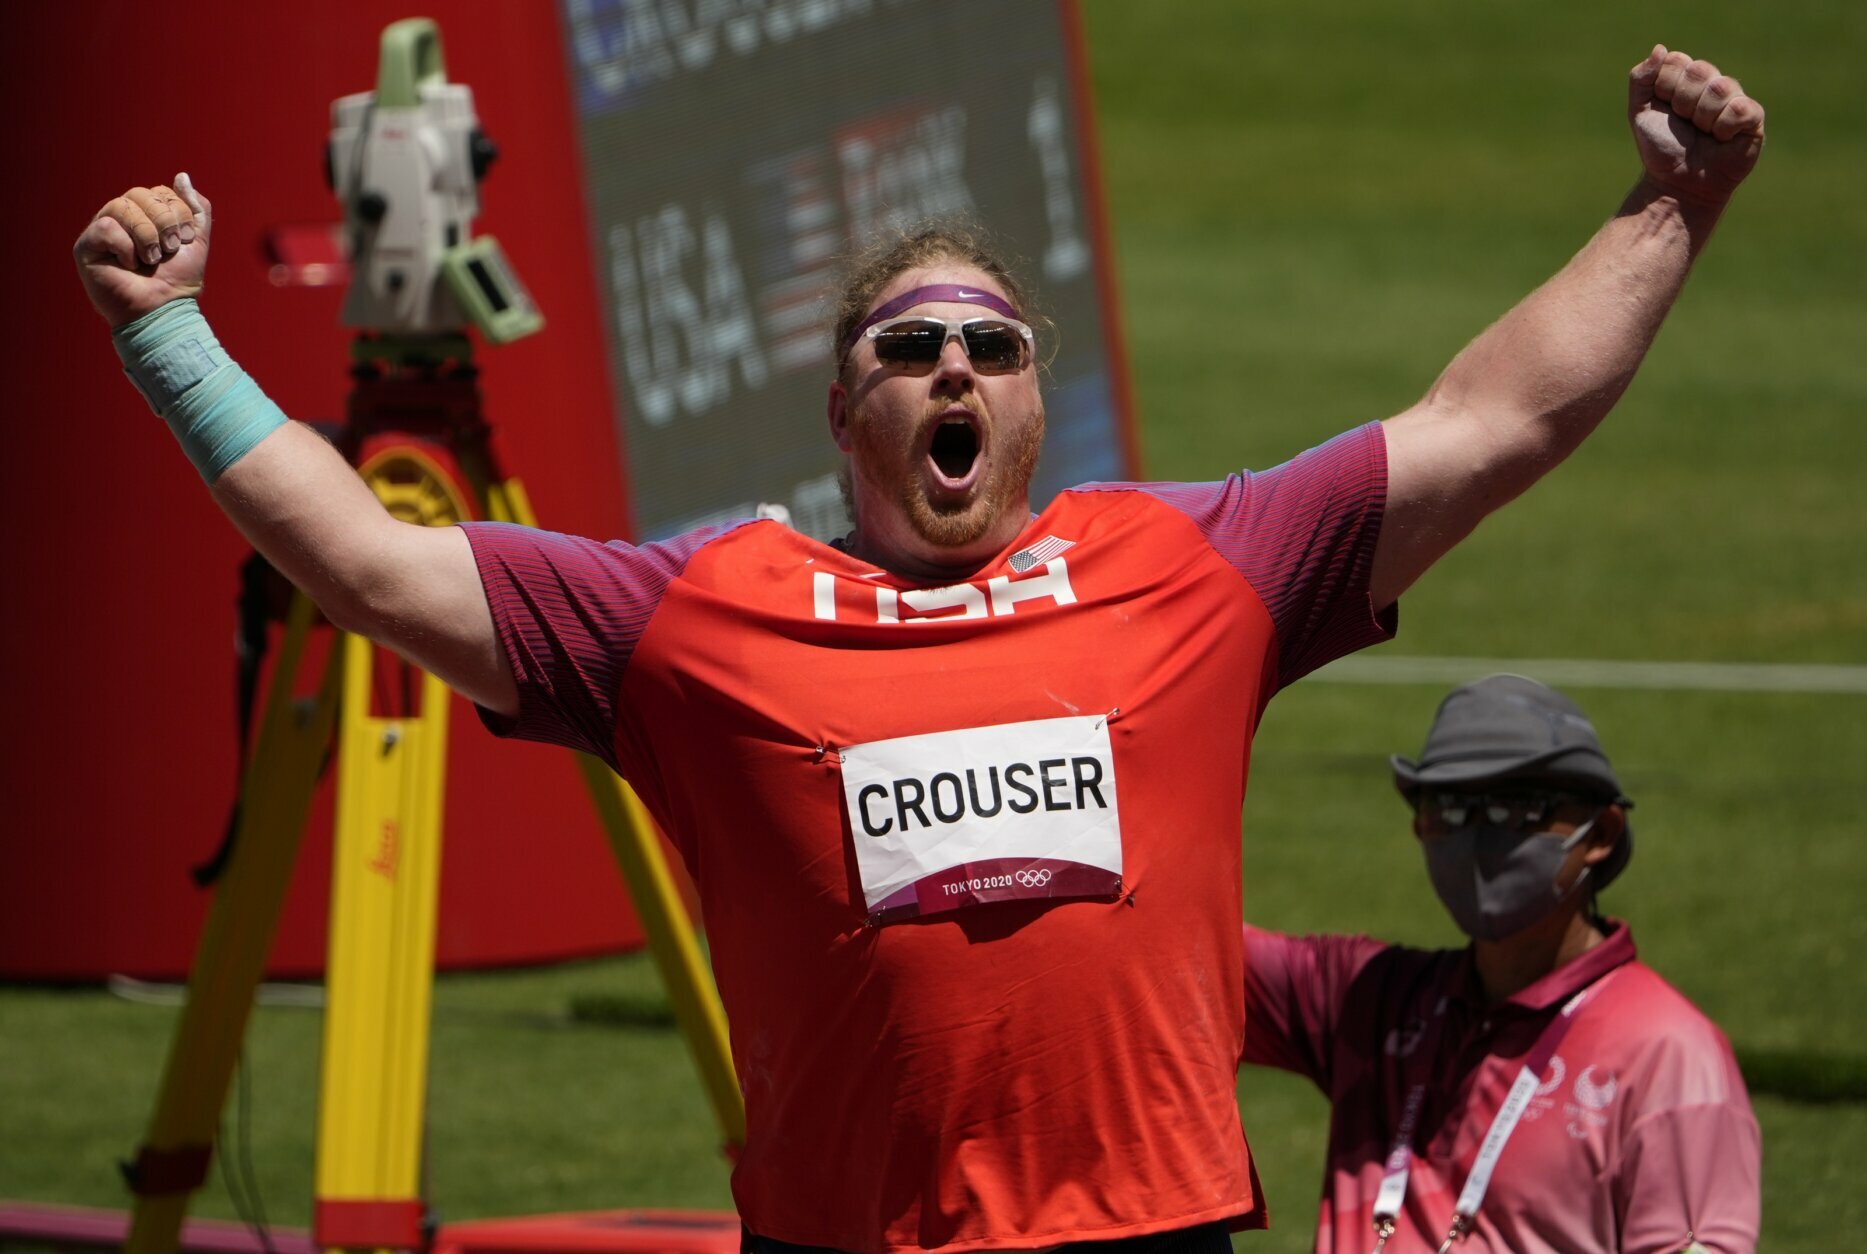 Ryan Crouser, of United States celebrates in the final of the men's shot put at the 2020 Summer Olympics, Thursday, Aug. 5, 2021, in Tokyo, Japan. (AP Photo/Charlie Riedel)